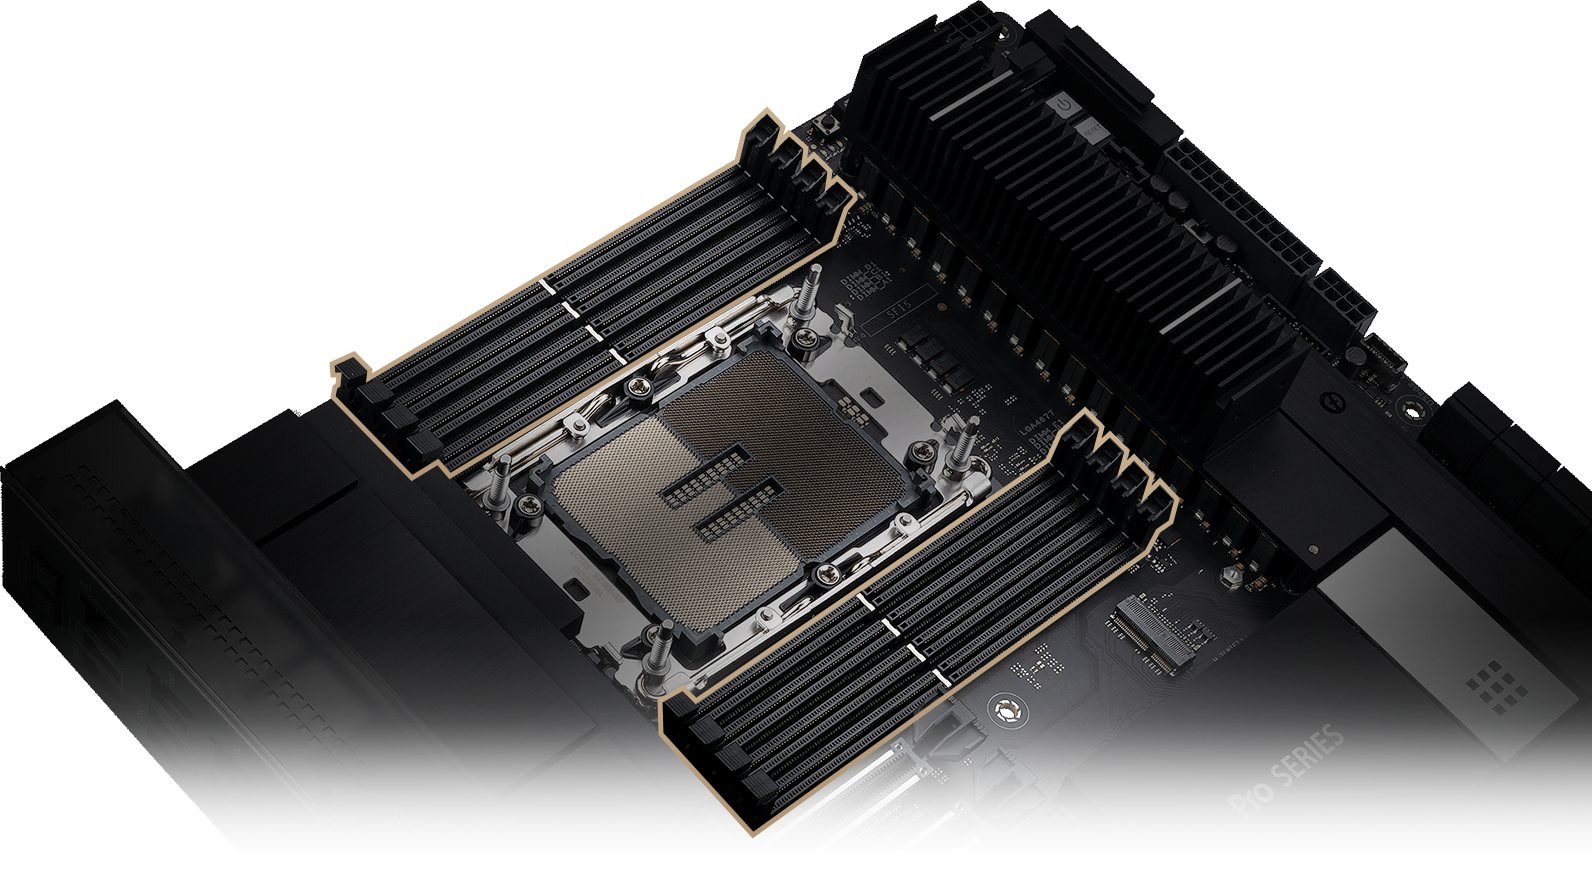 The close look on memory slots